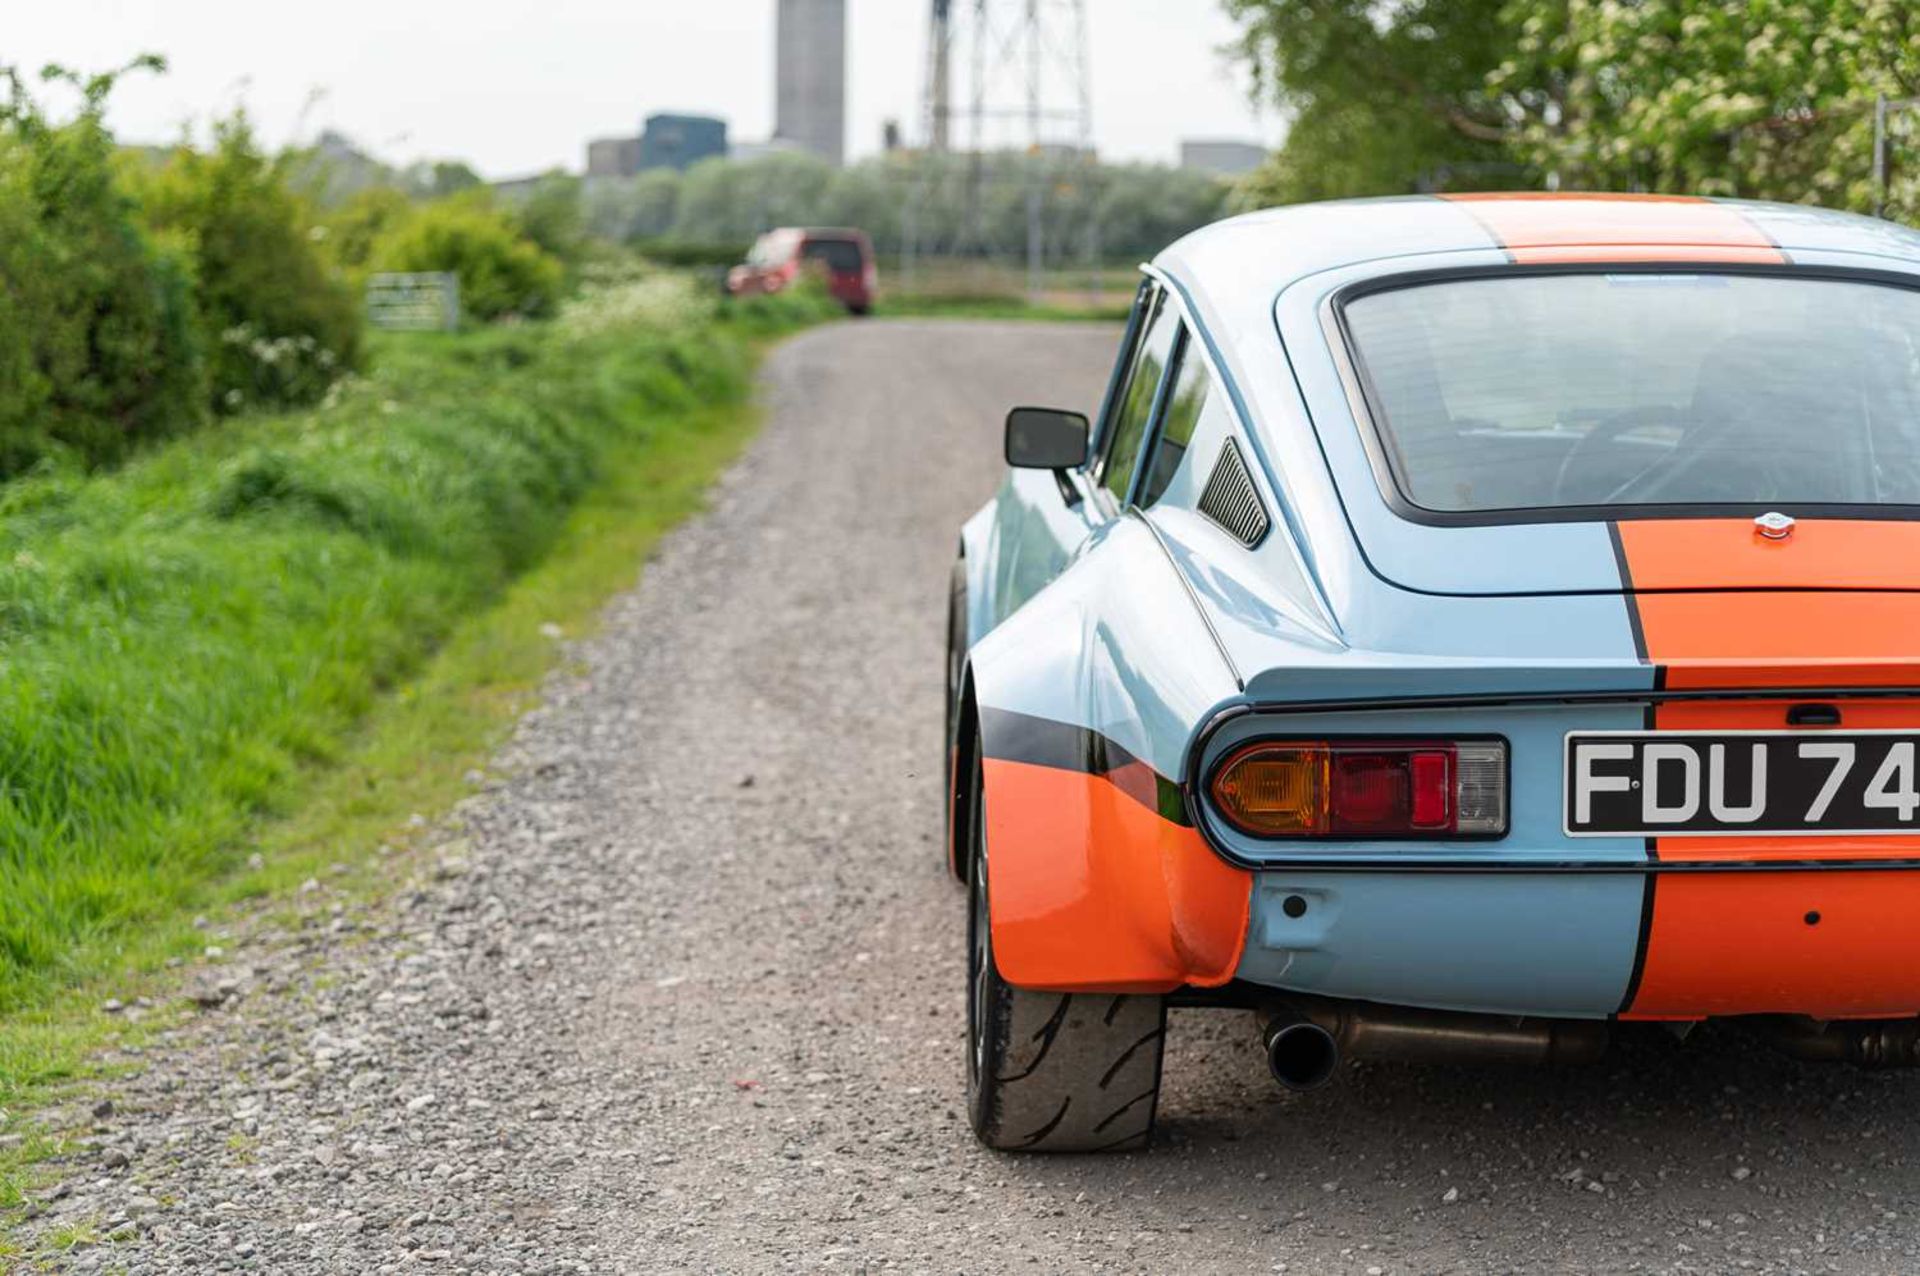 1973 Triumph GT6  ***NO RESERVE*** Presented in Gulf Racing-inspired paintwork, road-going track wea - Bild 10 aus 65